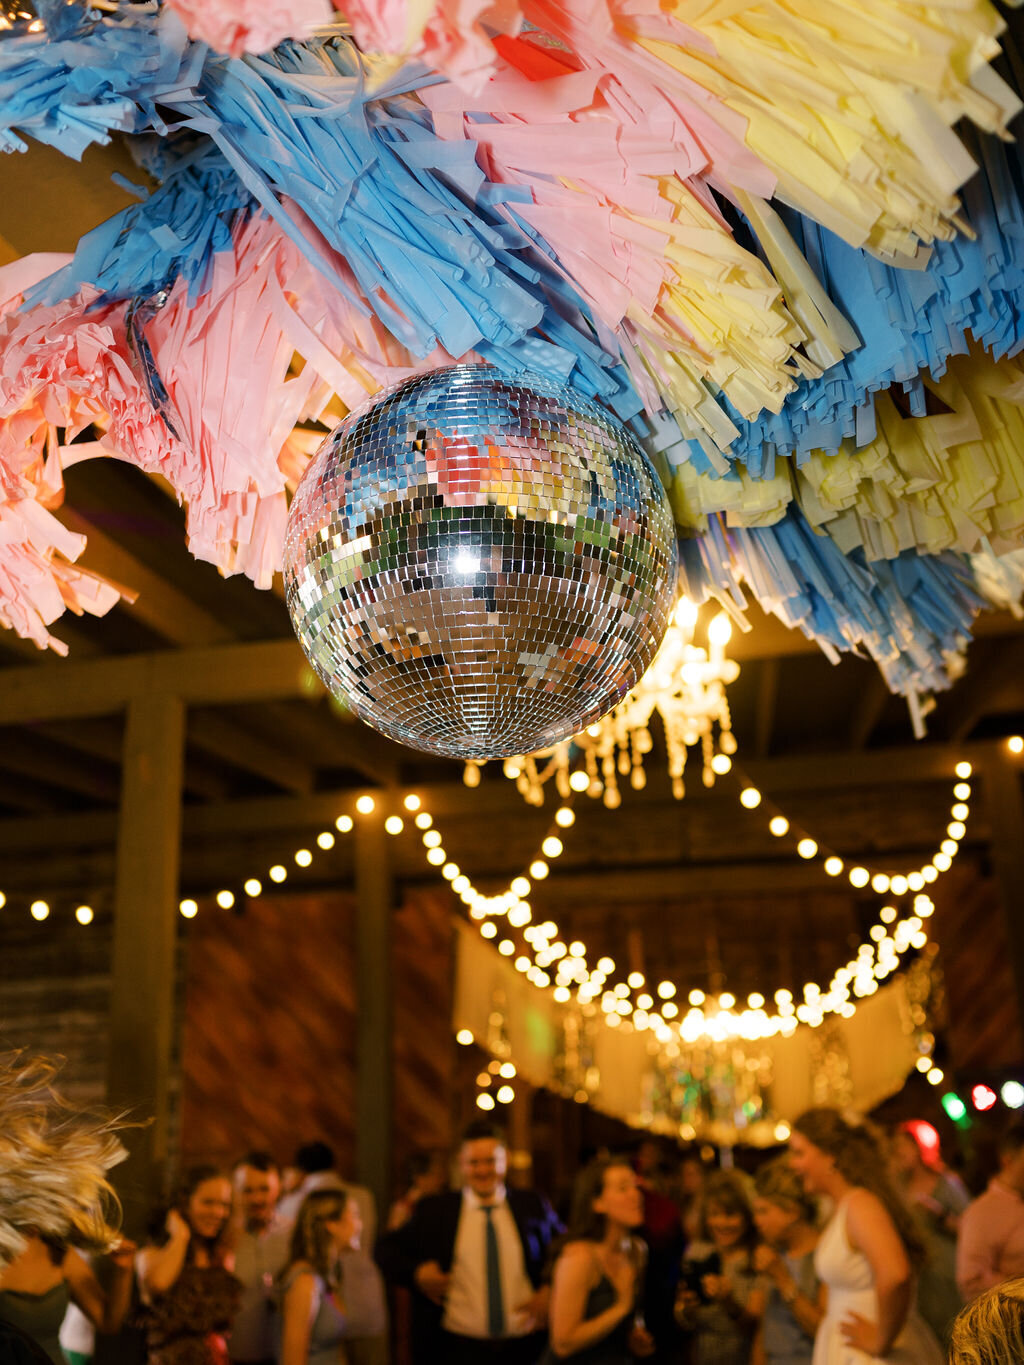 Disco ball at a wedding reception surrounded by colorful streamers